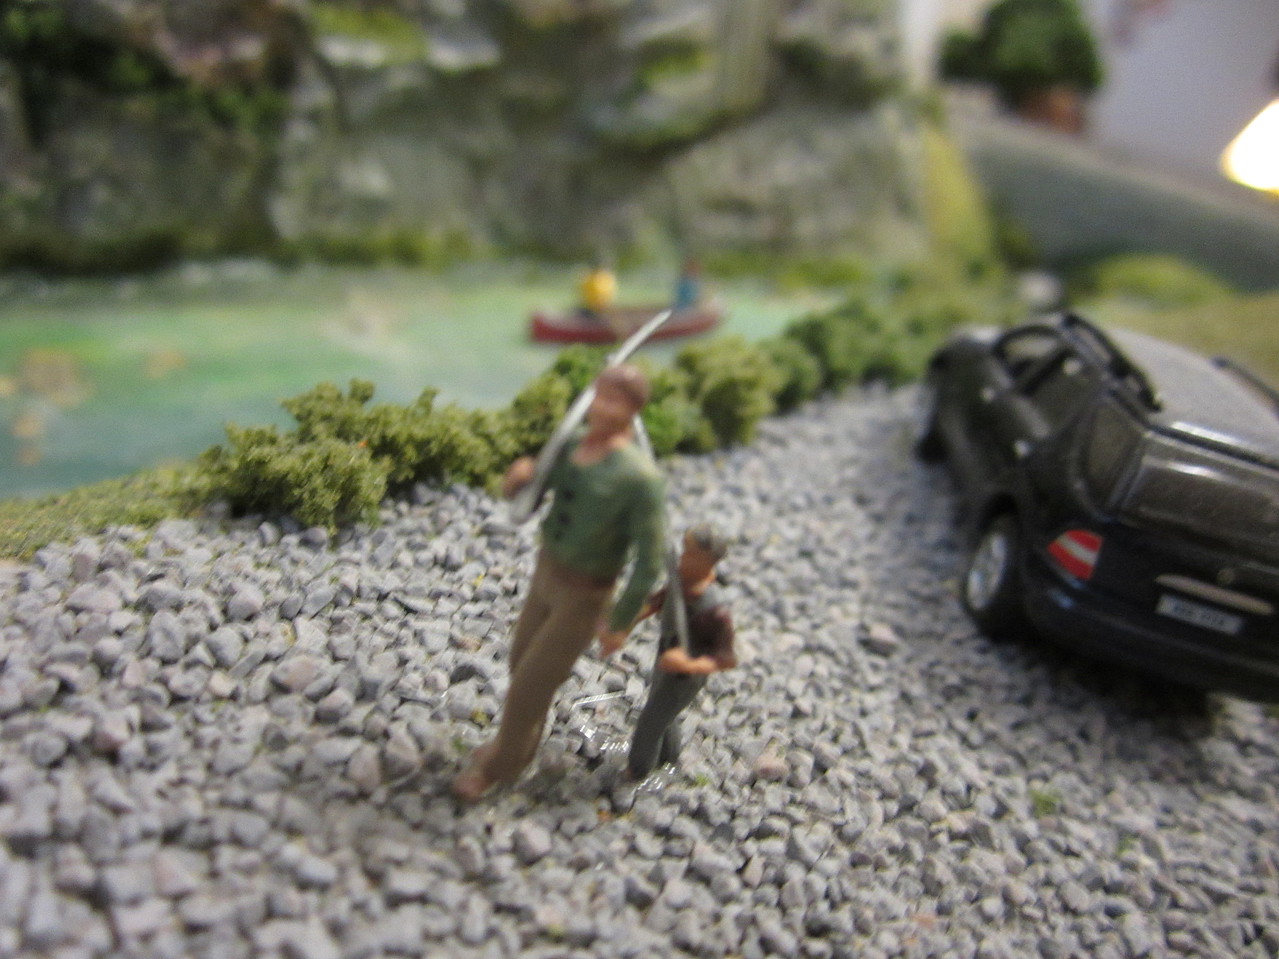 Woodland Scenics Gone Fishing HO Scale Figures A1878 for sale online